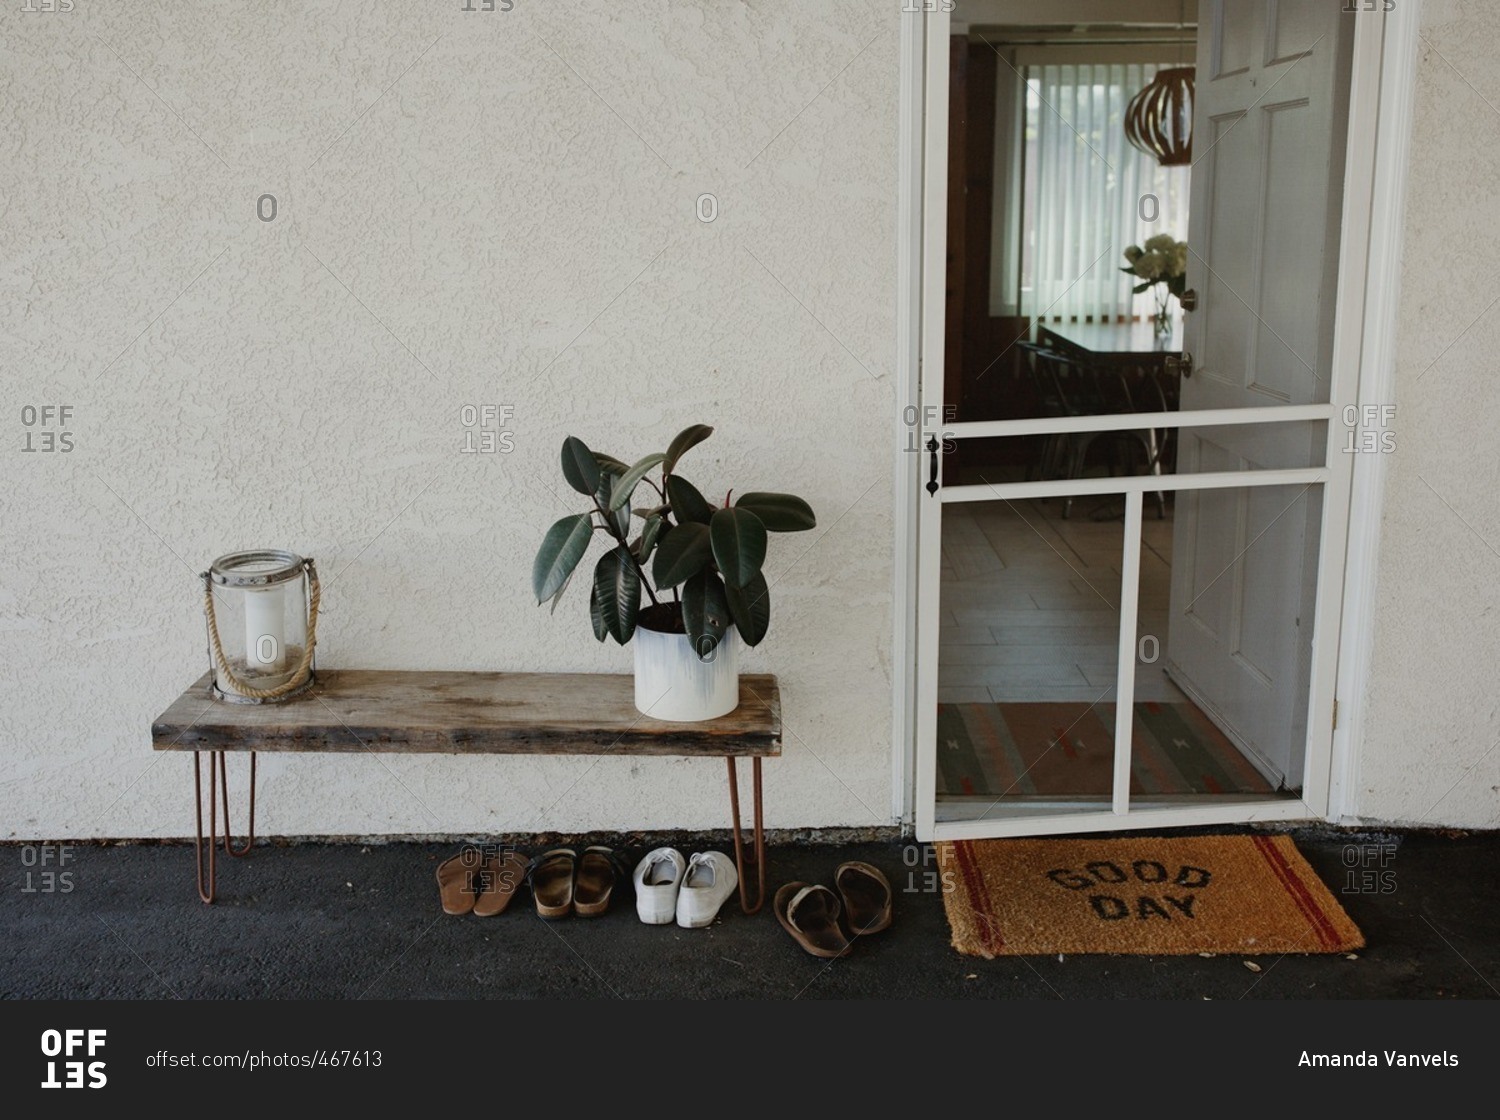 Entrance to home with screen door, welcome mat, and a small table with decorations